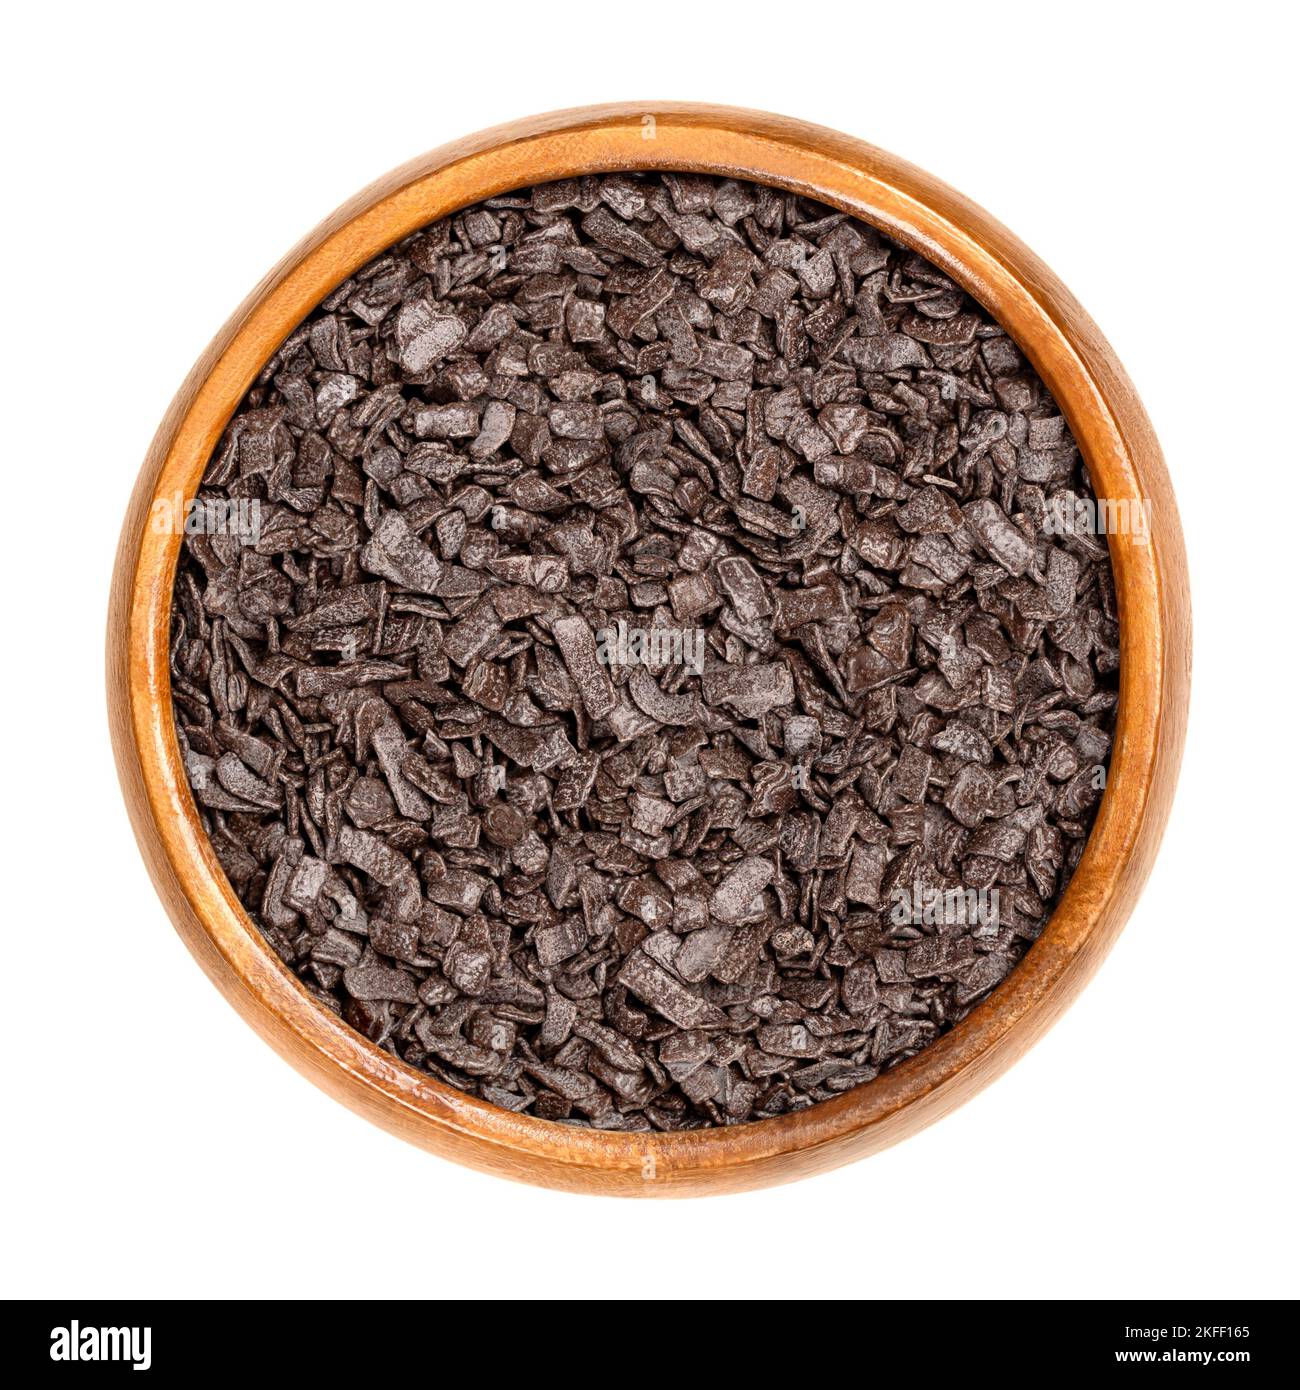 Dark chocolate flakes topping, in a wooden bowl. Chocolate sprinkles, used in baking as decoration or to add texture to cookies, cakes and desserts. Stock Photo